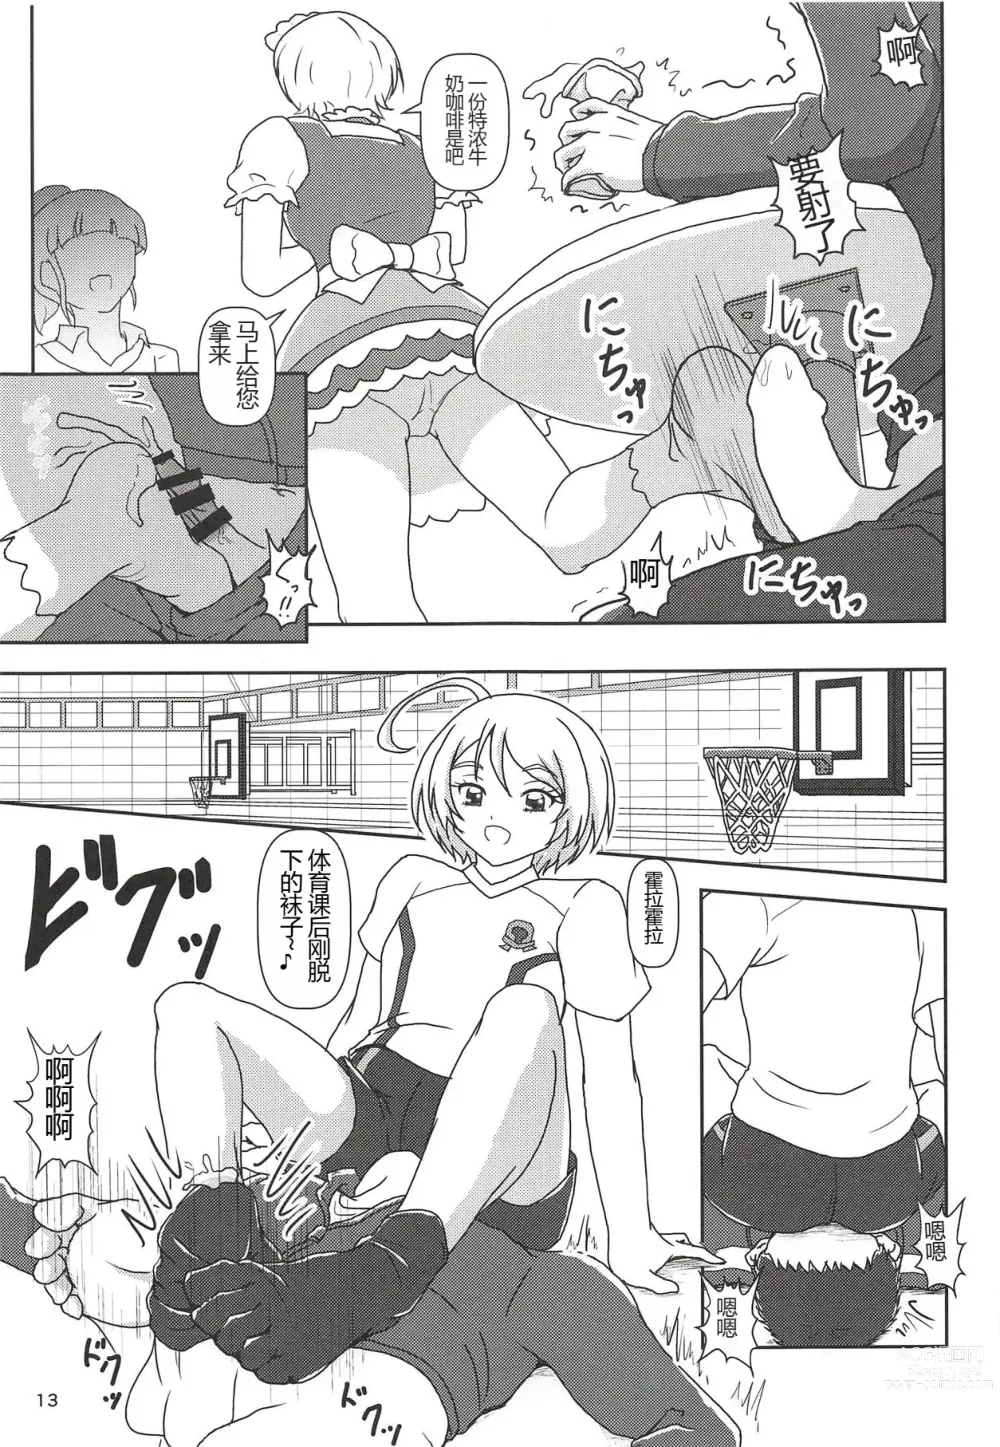 Page 12 of doujinshi Hugtto! Zuricure